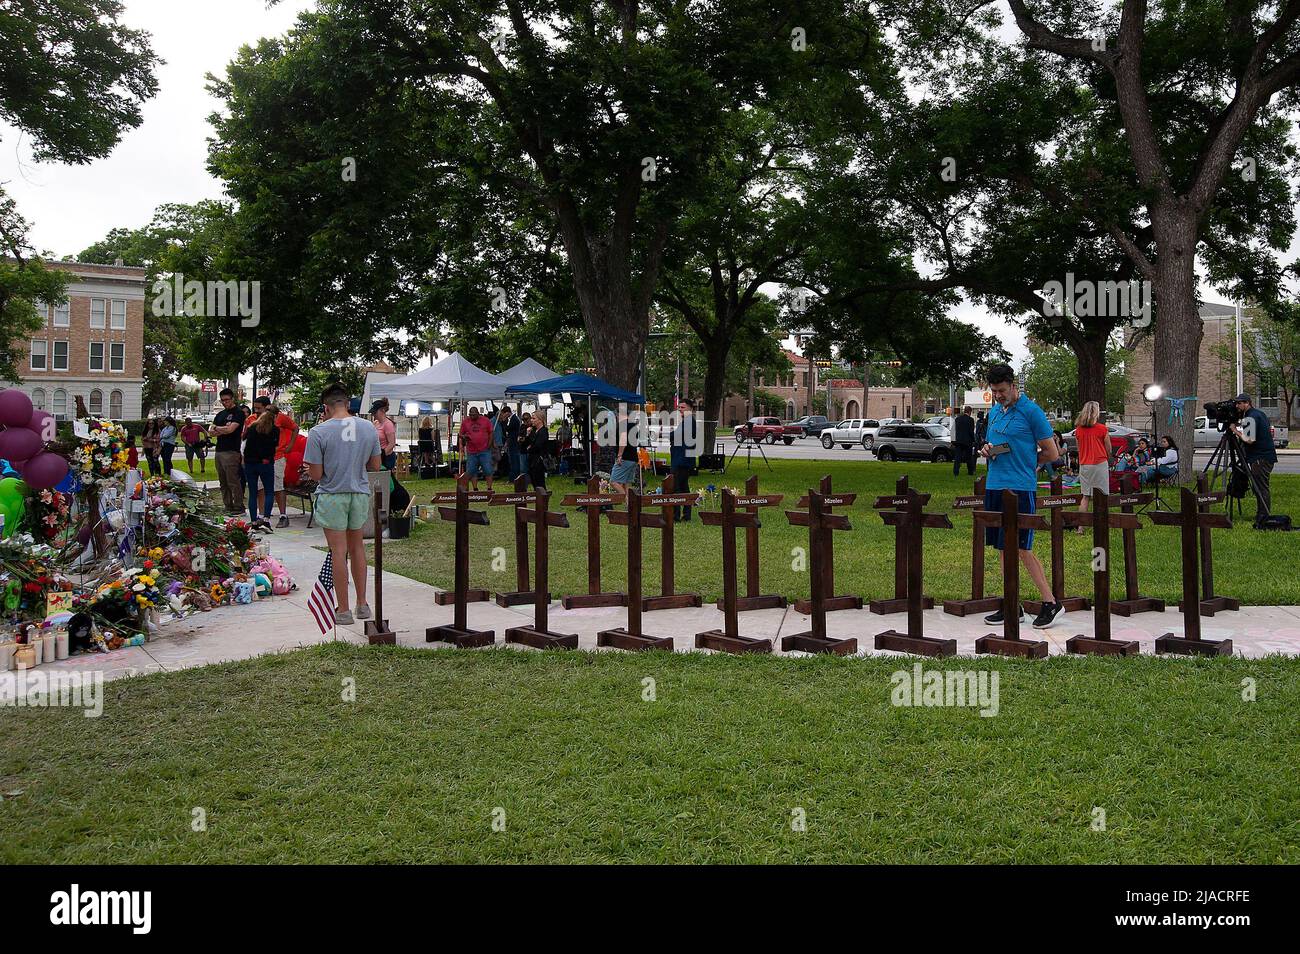 May 29, 2022: Crosses bear the names of the shooting victims in the town square in Uvalde. Residents give their respects to the 19 children killed in the mass shooting at Robb Elementary School. Uvalde, Texas. Mario Cantu/CSM. Stock Photo